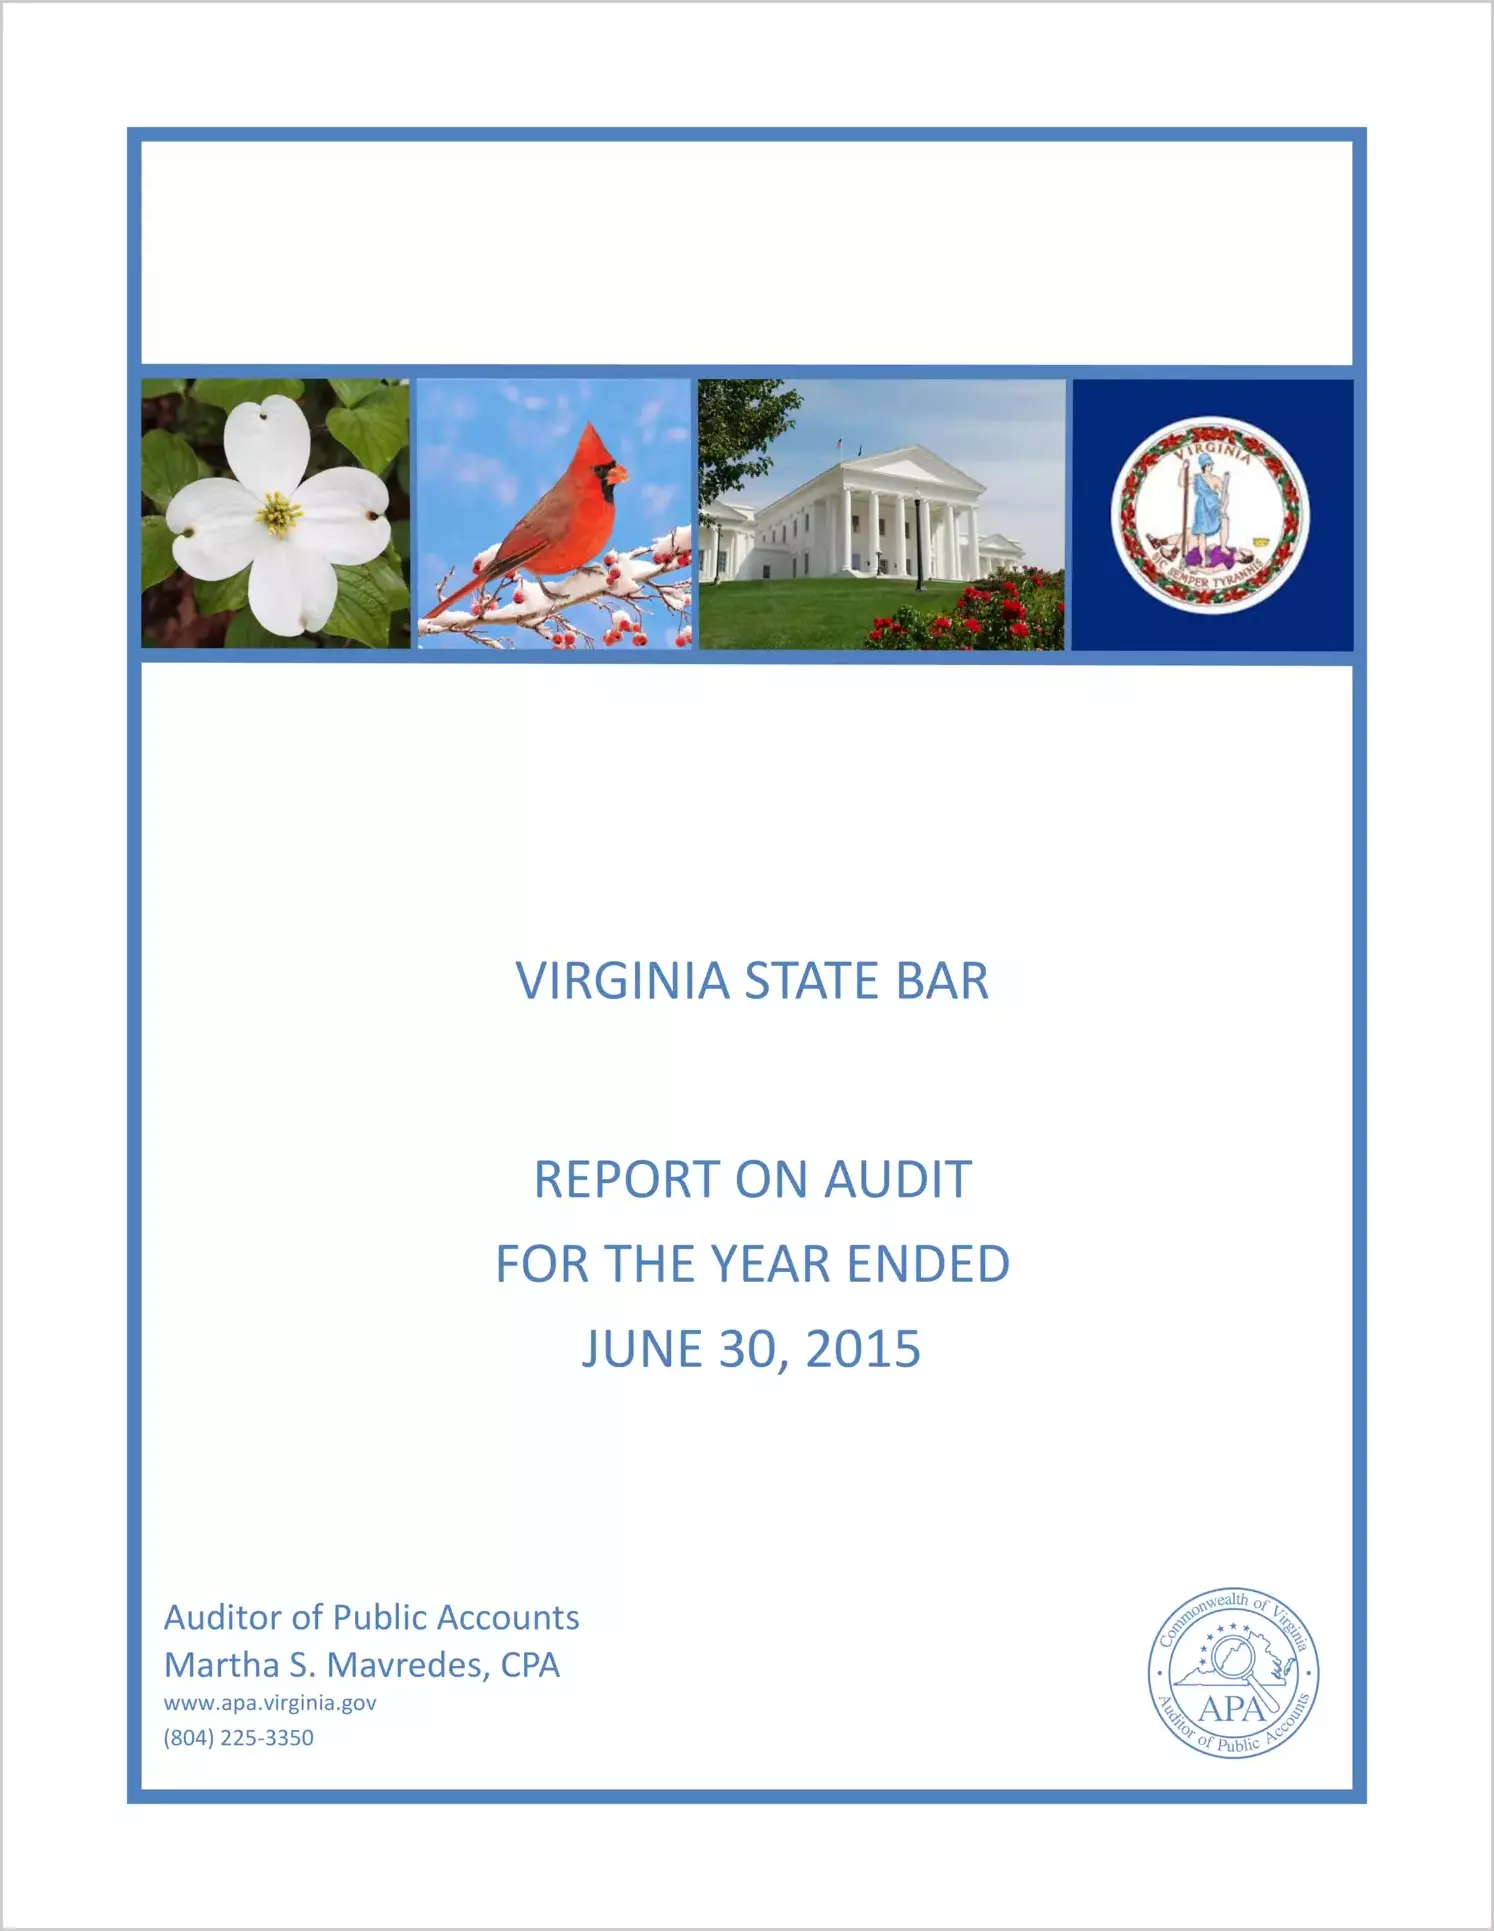 Virginia State Bar Report on Audit for the Fiscal Year Ended June 30, 2015